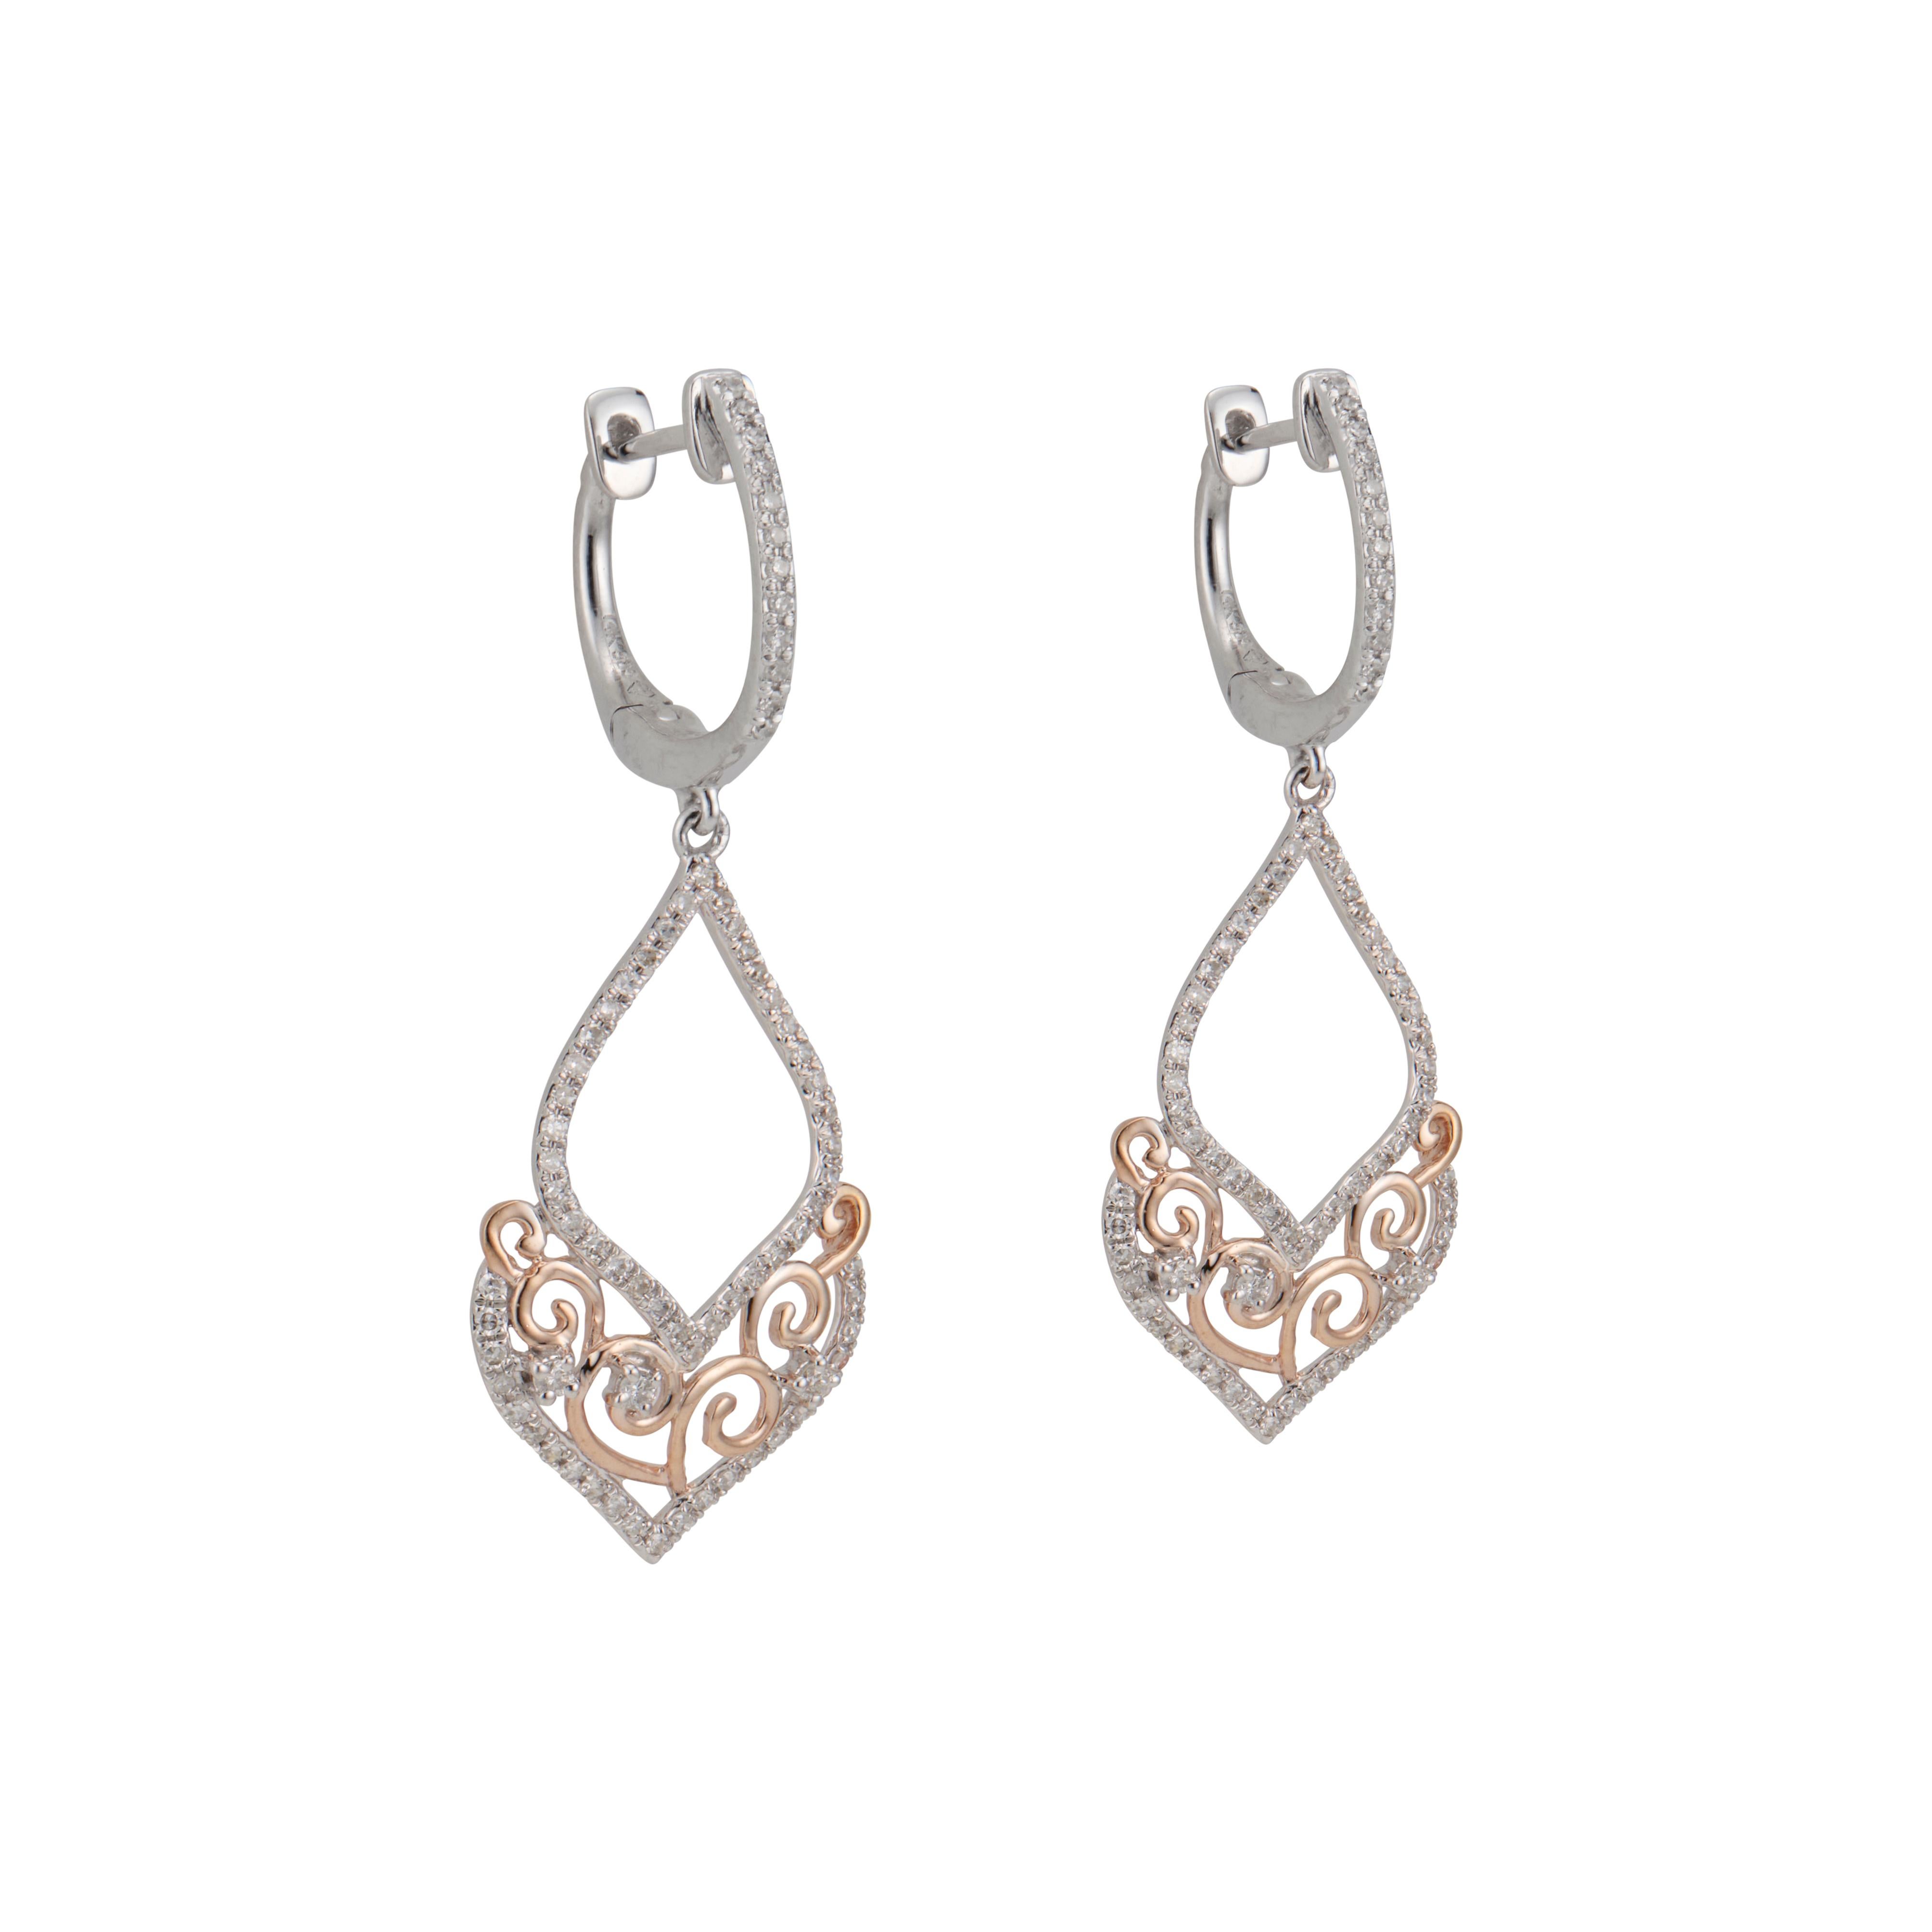 Diamond dangle earrings. 148 round cut diamonds set in 14k white and rose gold open work setting. 

148 round full cut diamonds, approx. total weight .54cts, H, VS – SI
14k white gold
14k rose gold 
Tested: 14k
3.9 grams
Top to bottom: 39.56mm or